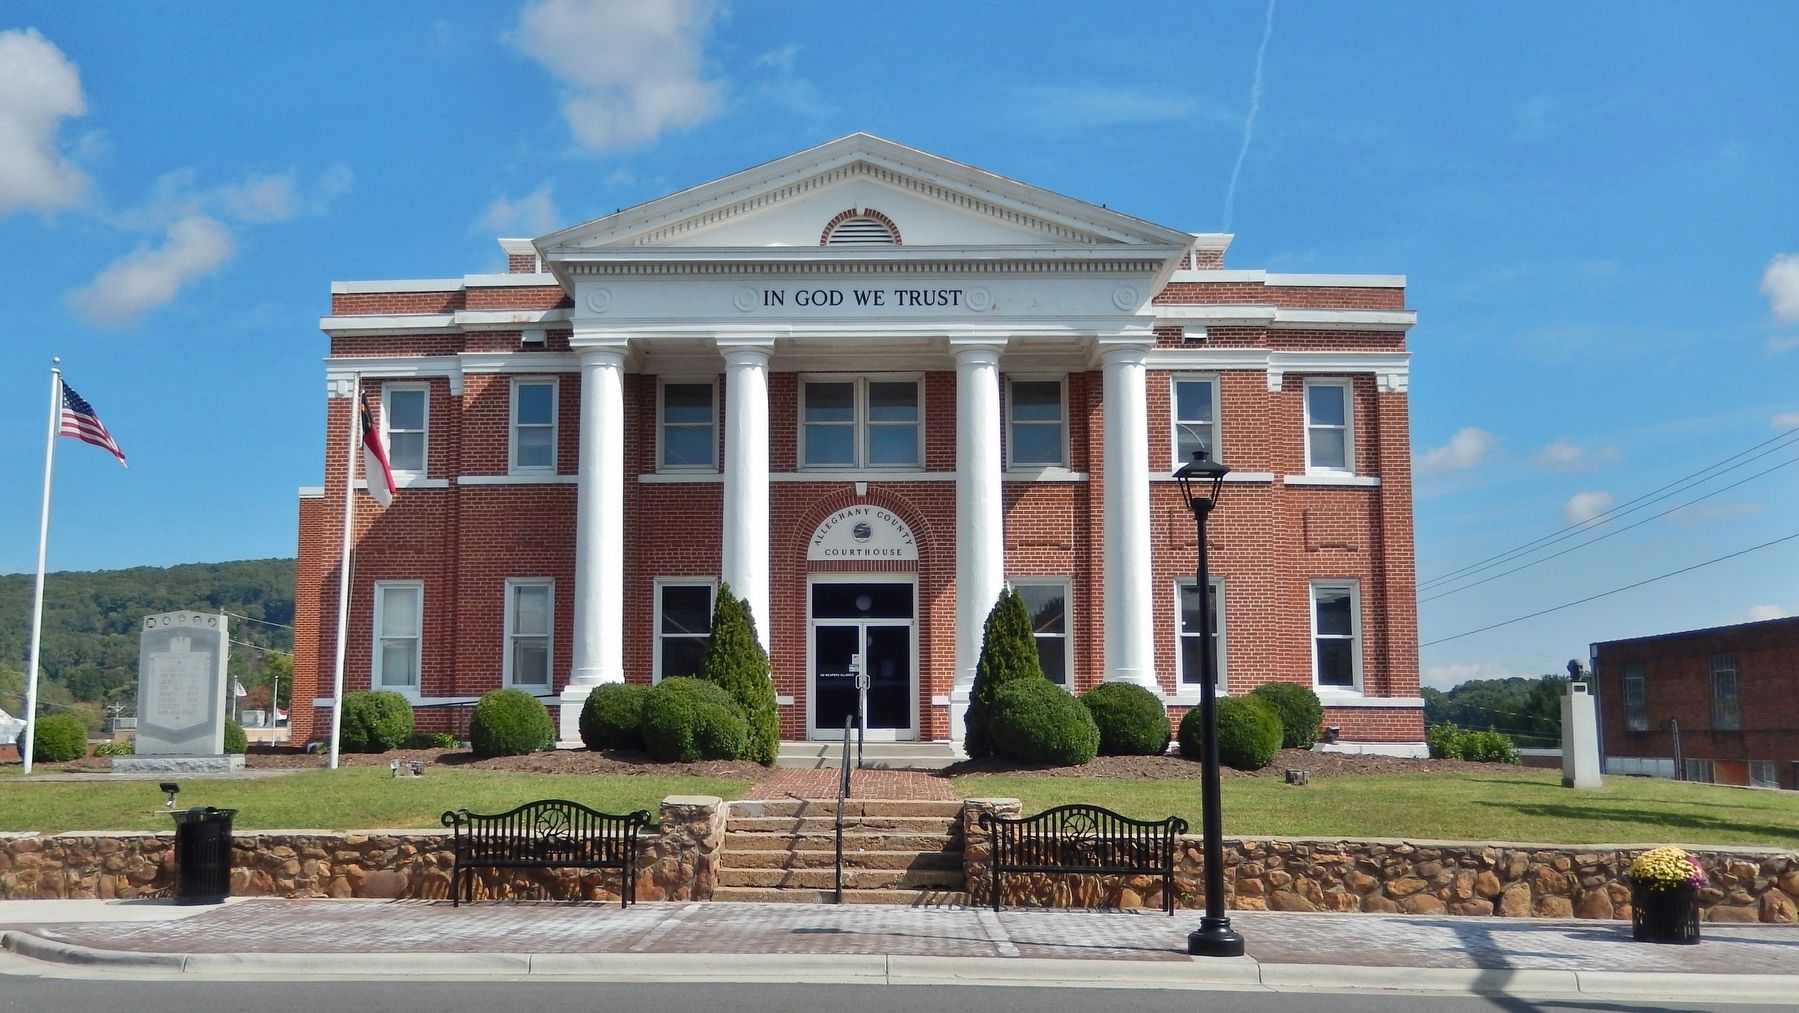 Alleghany County Courthouse (<i>southwest/front elevation</i>) image. Click for full size.